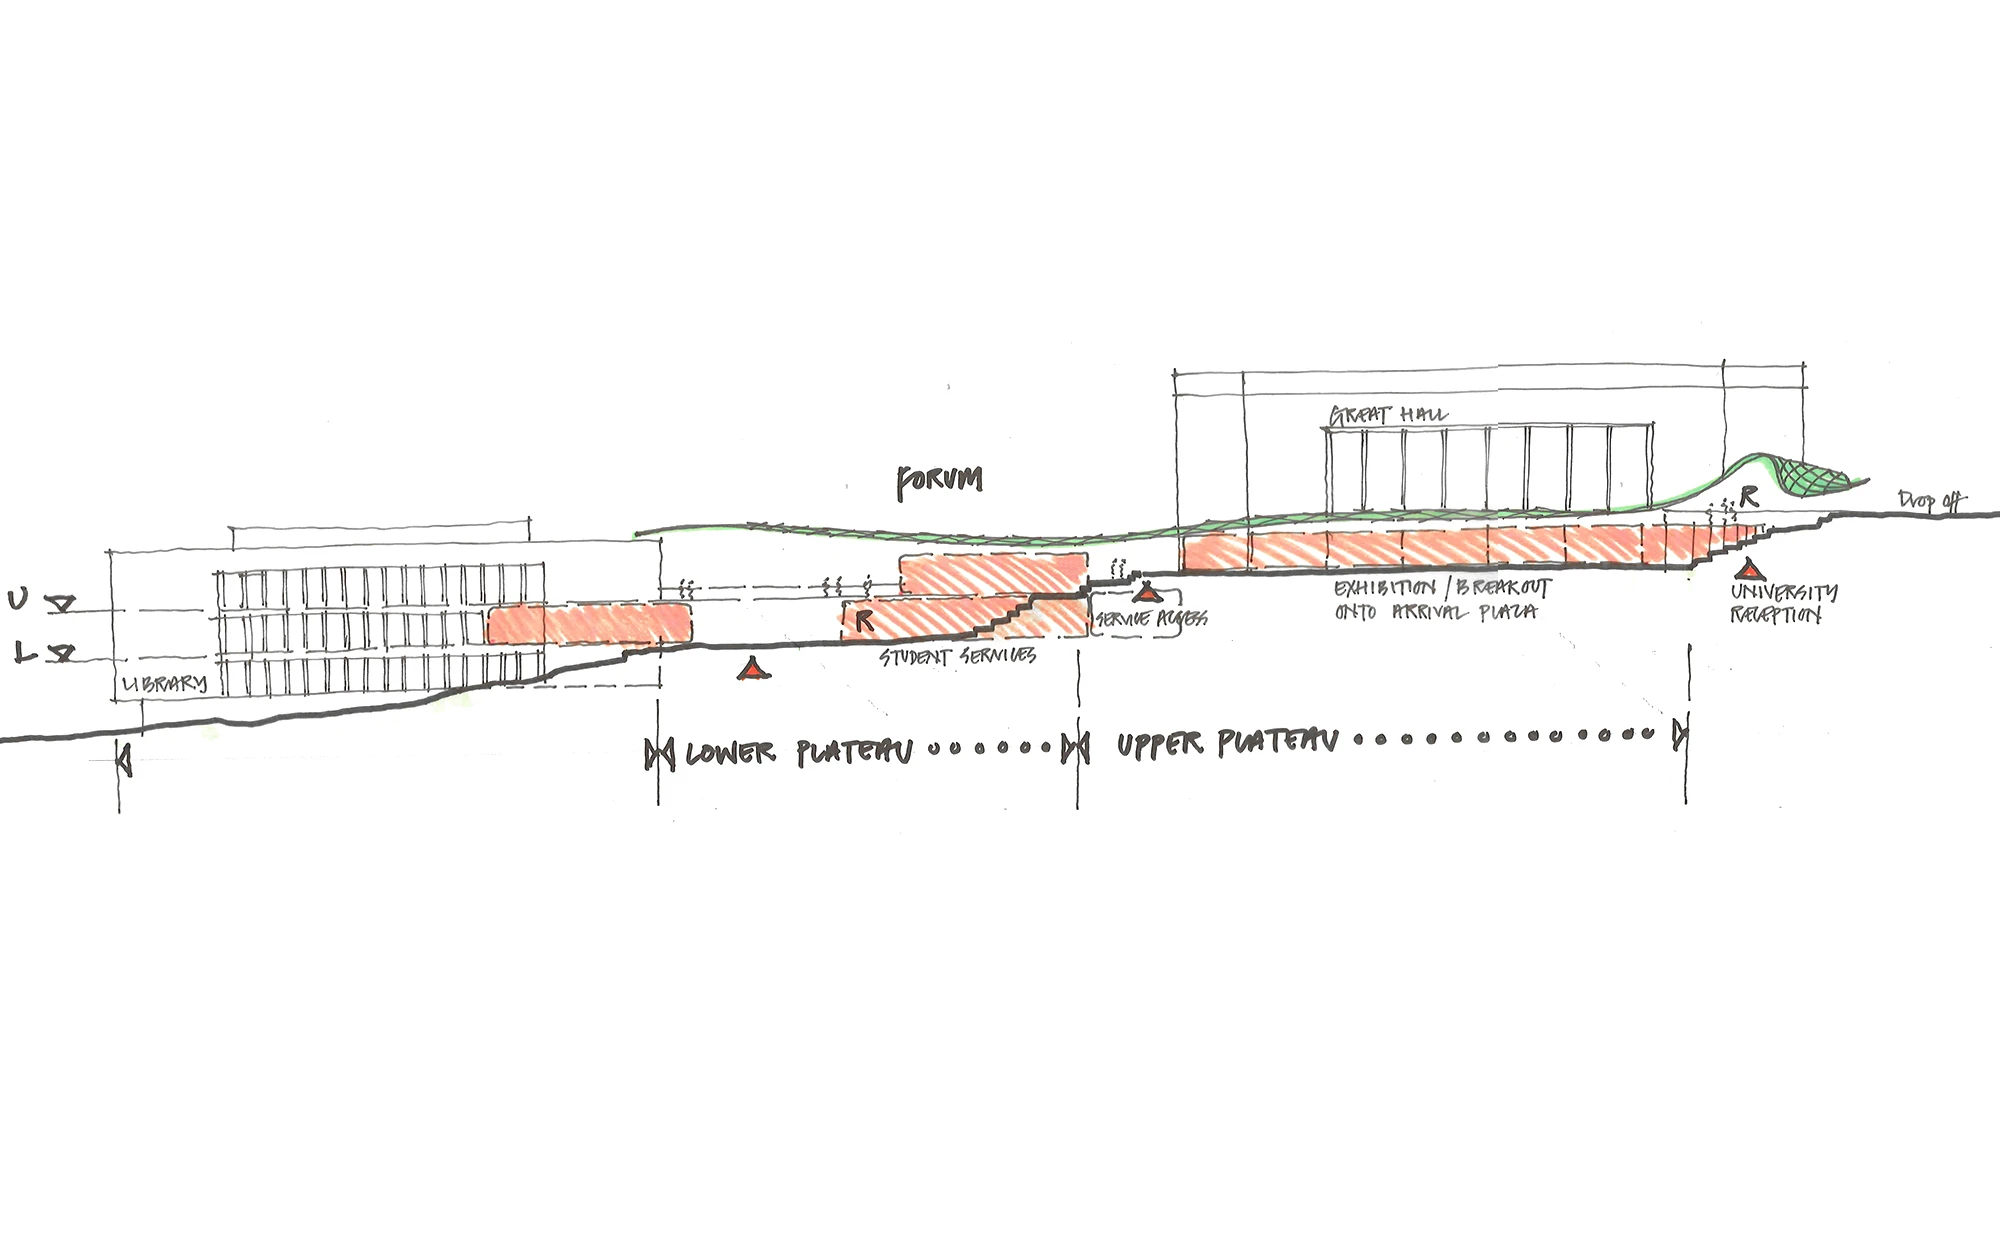 Diagram of the Forum at the Exeter University